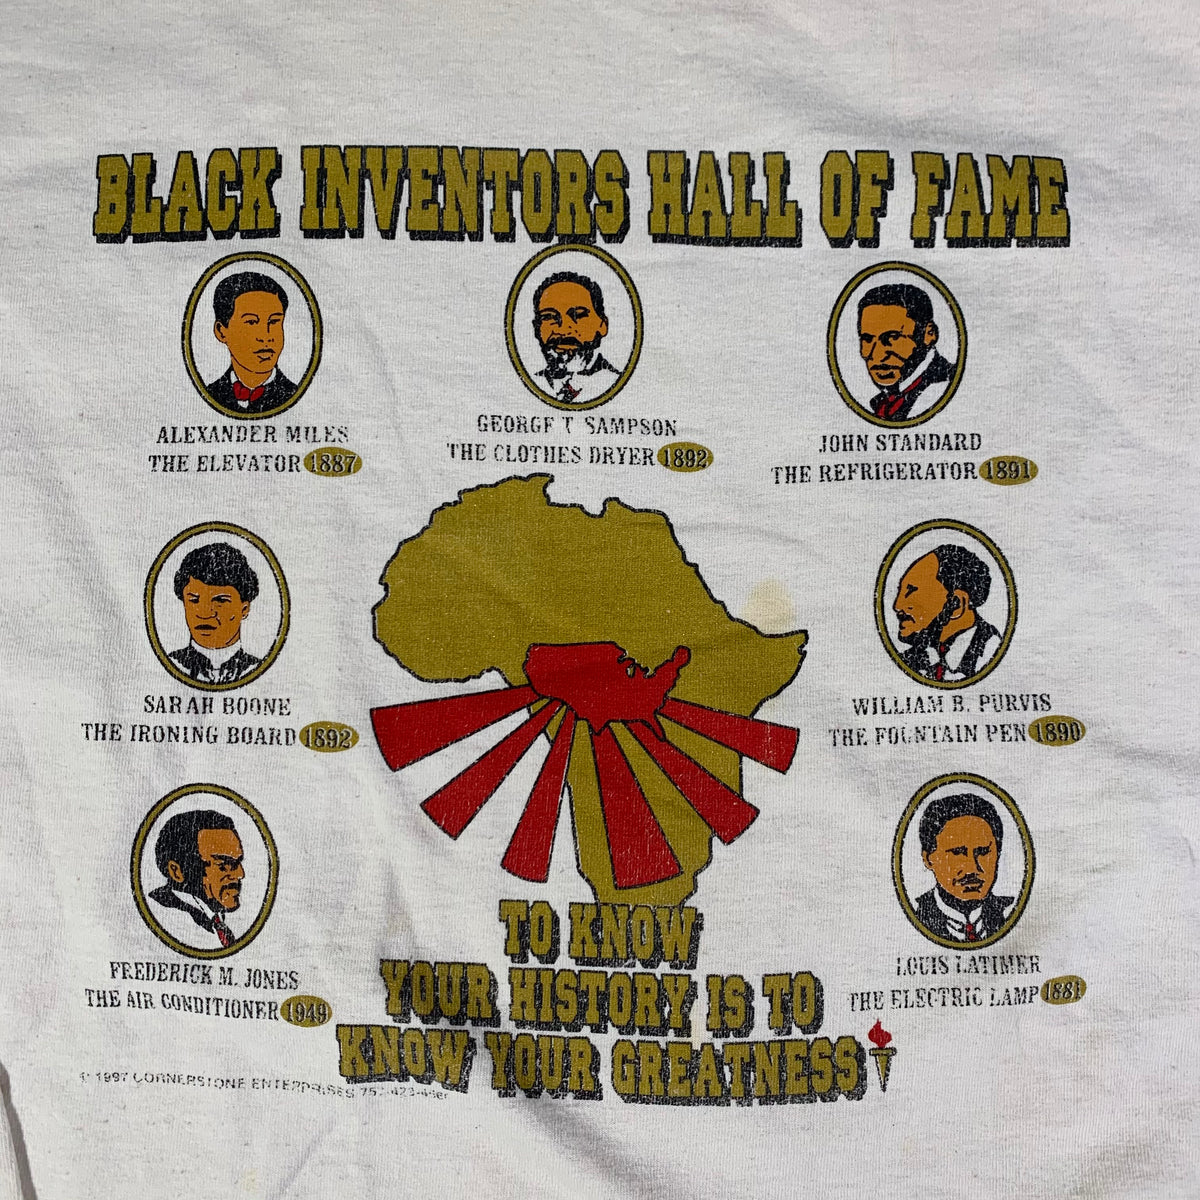 Vintage Black Inventors Hall Of Fame &quot;Know Your Greatness&quot; Long Sleeve Shirt